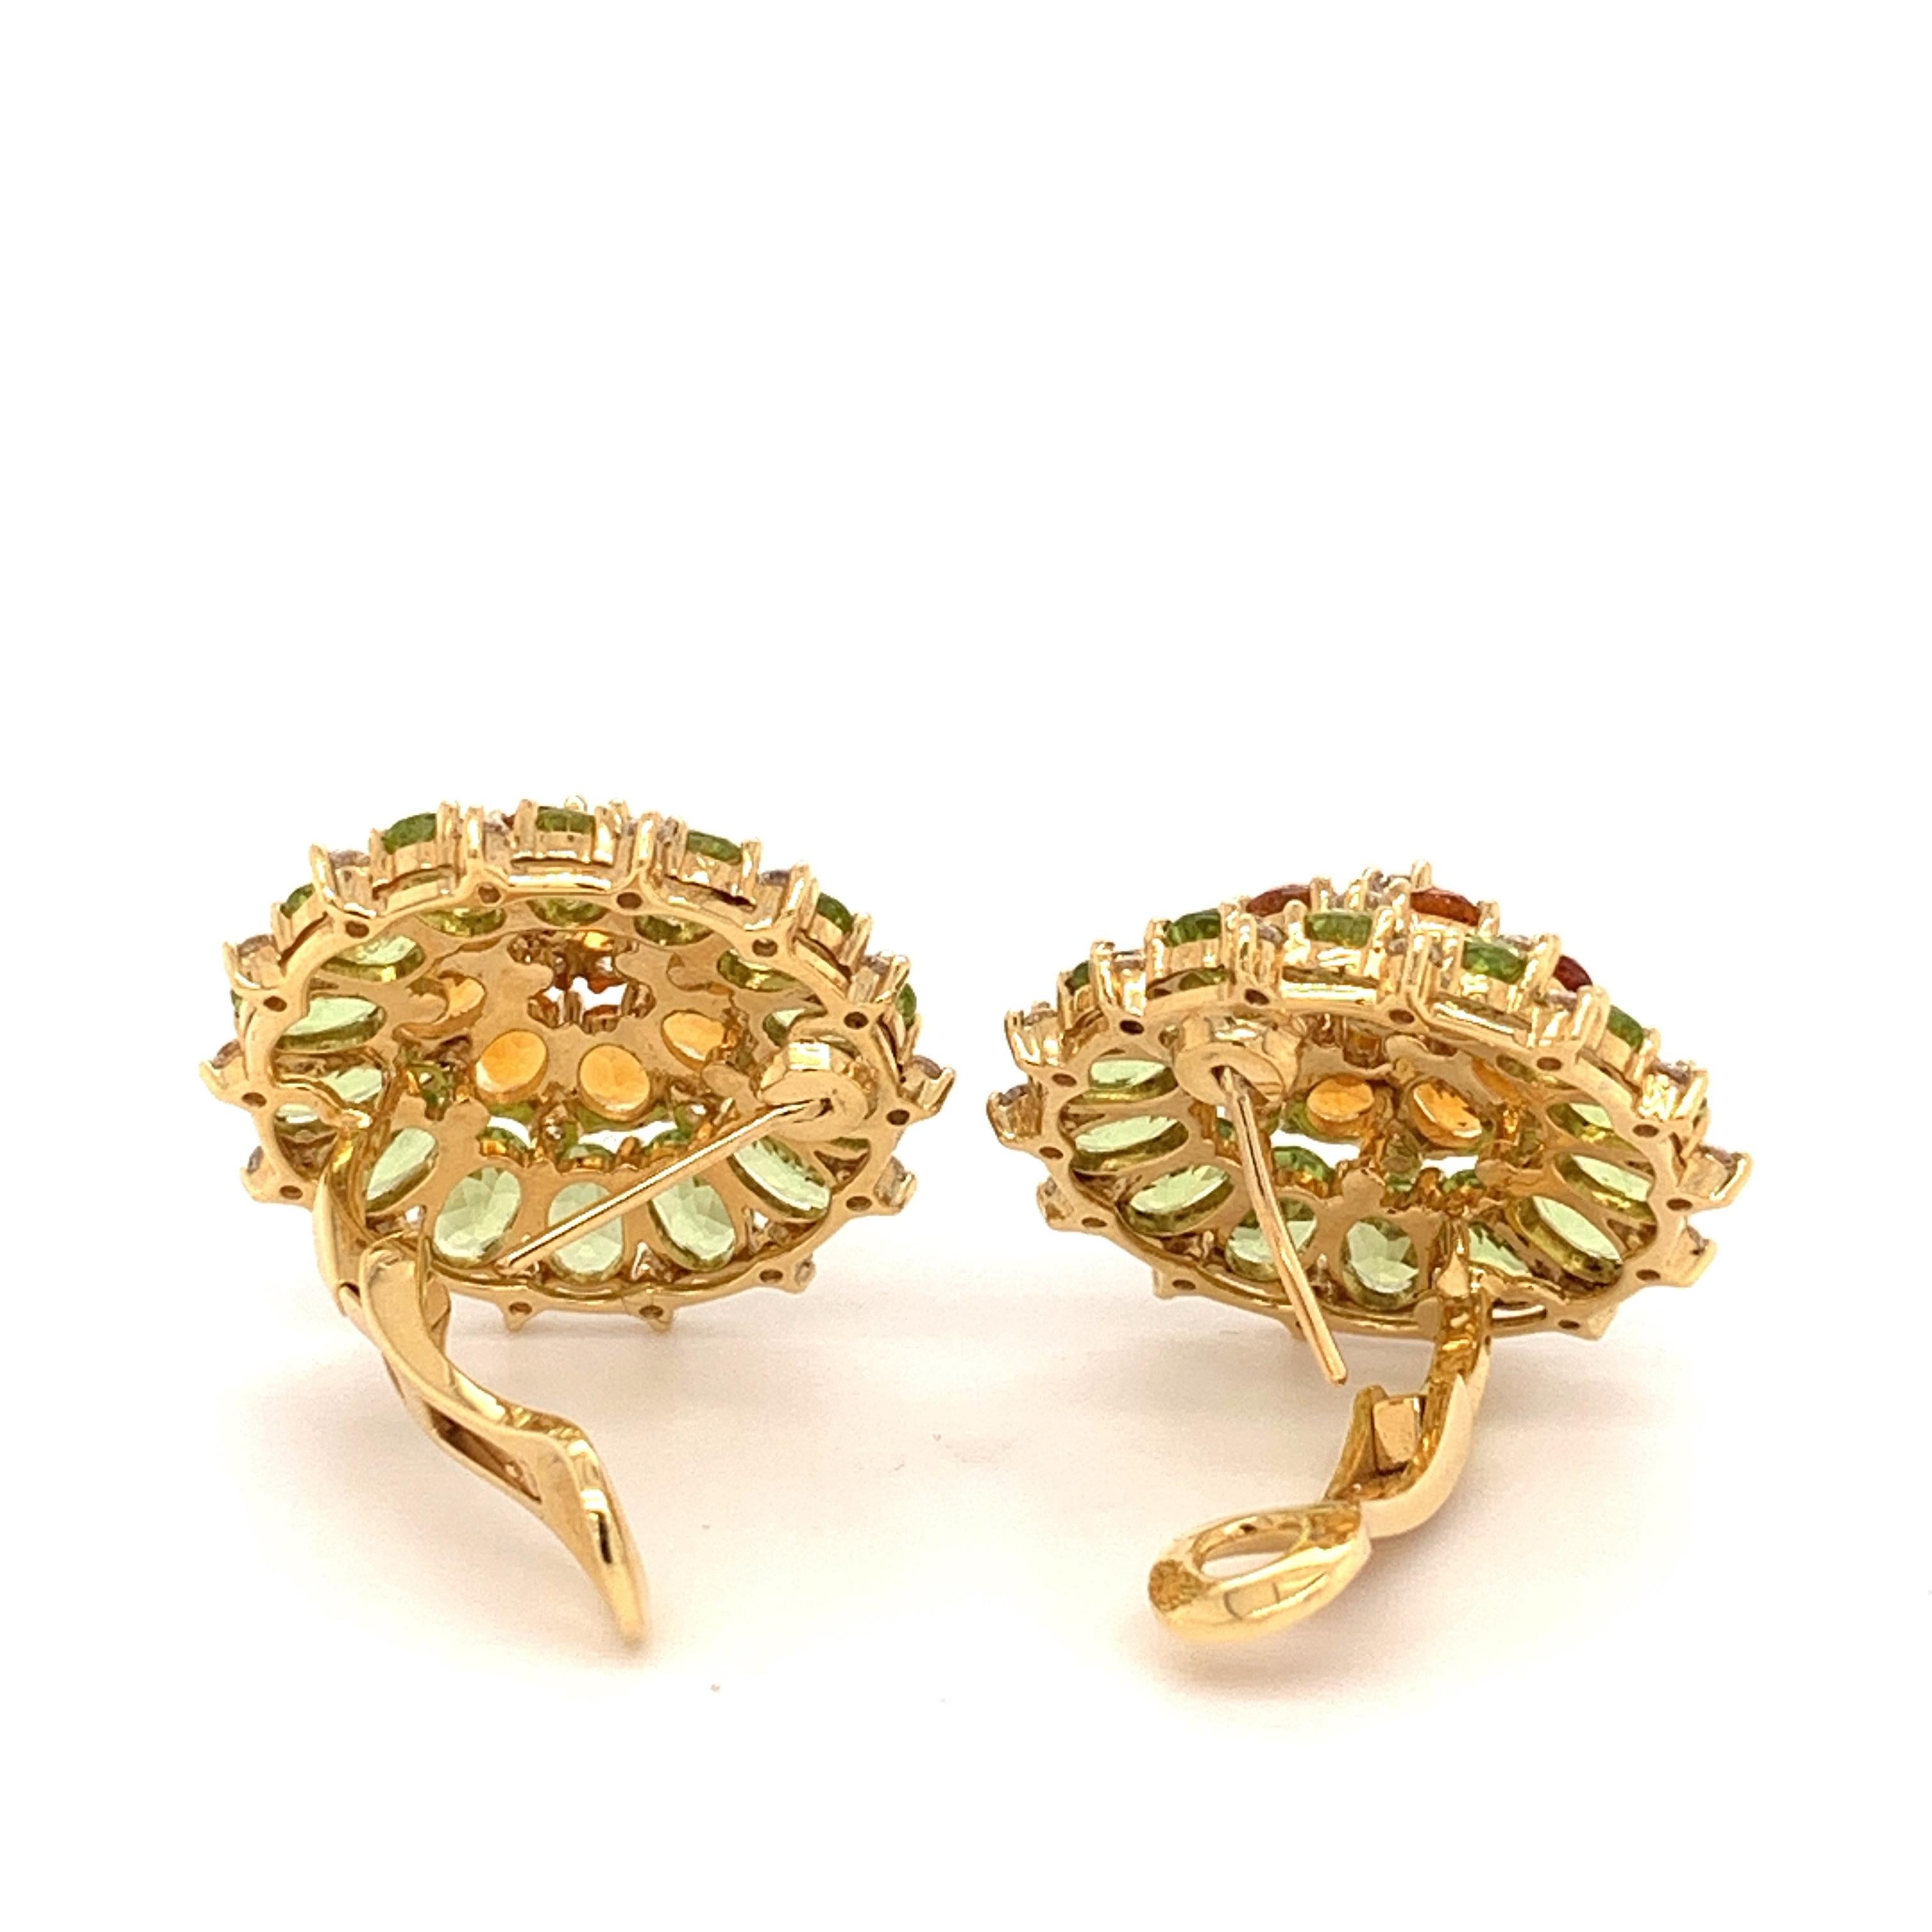 Sophia D. multi-colored earrings with peridot weighing 13.87 carats together with 4.54 citrine and 2.15 carats of diamonds set in 18 karat yellow gold. 

Sophia D by Joseph Dardashti LTD has been known worldwide for 35 years and are inspired by